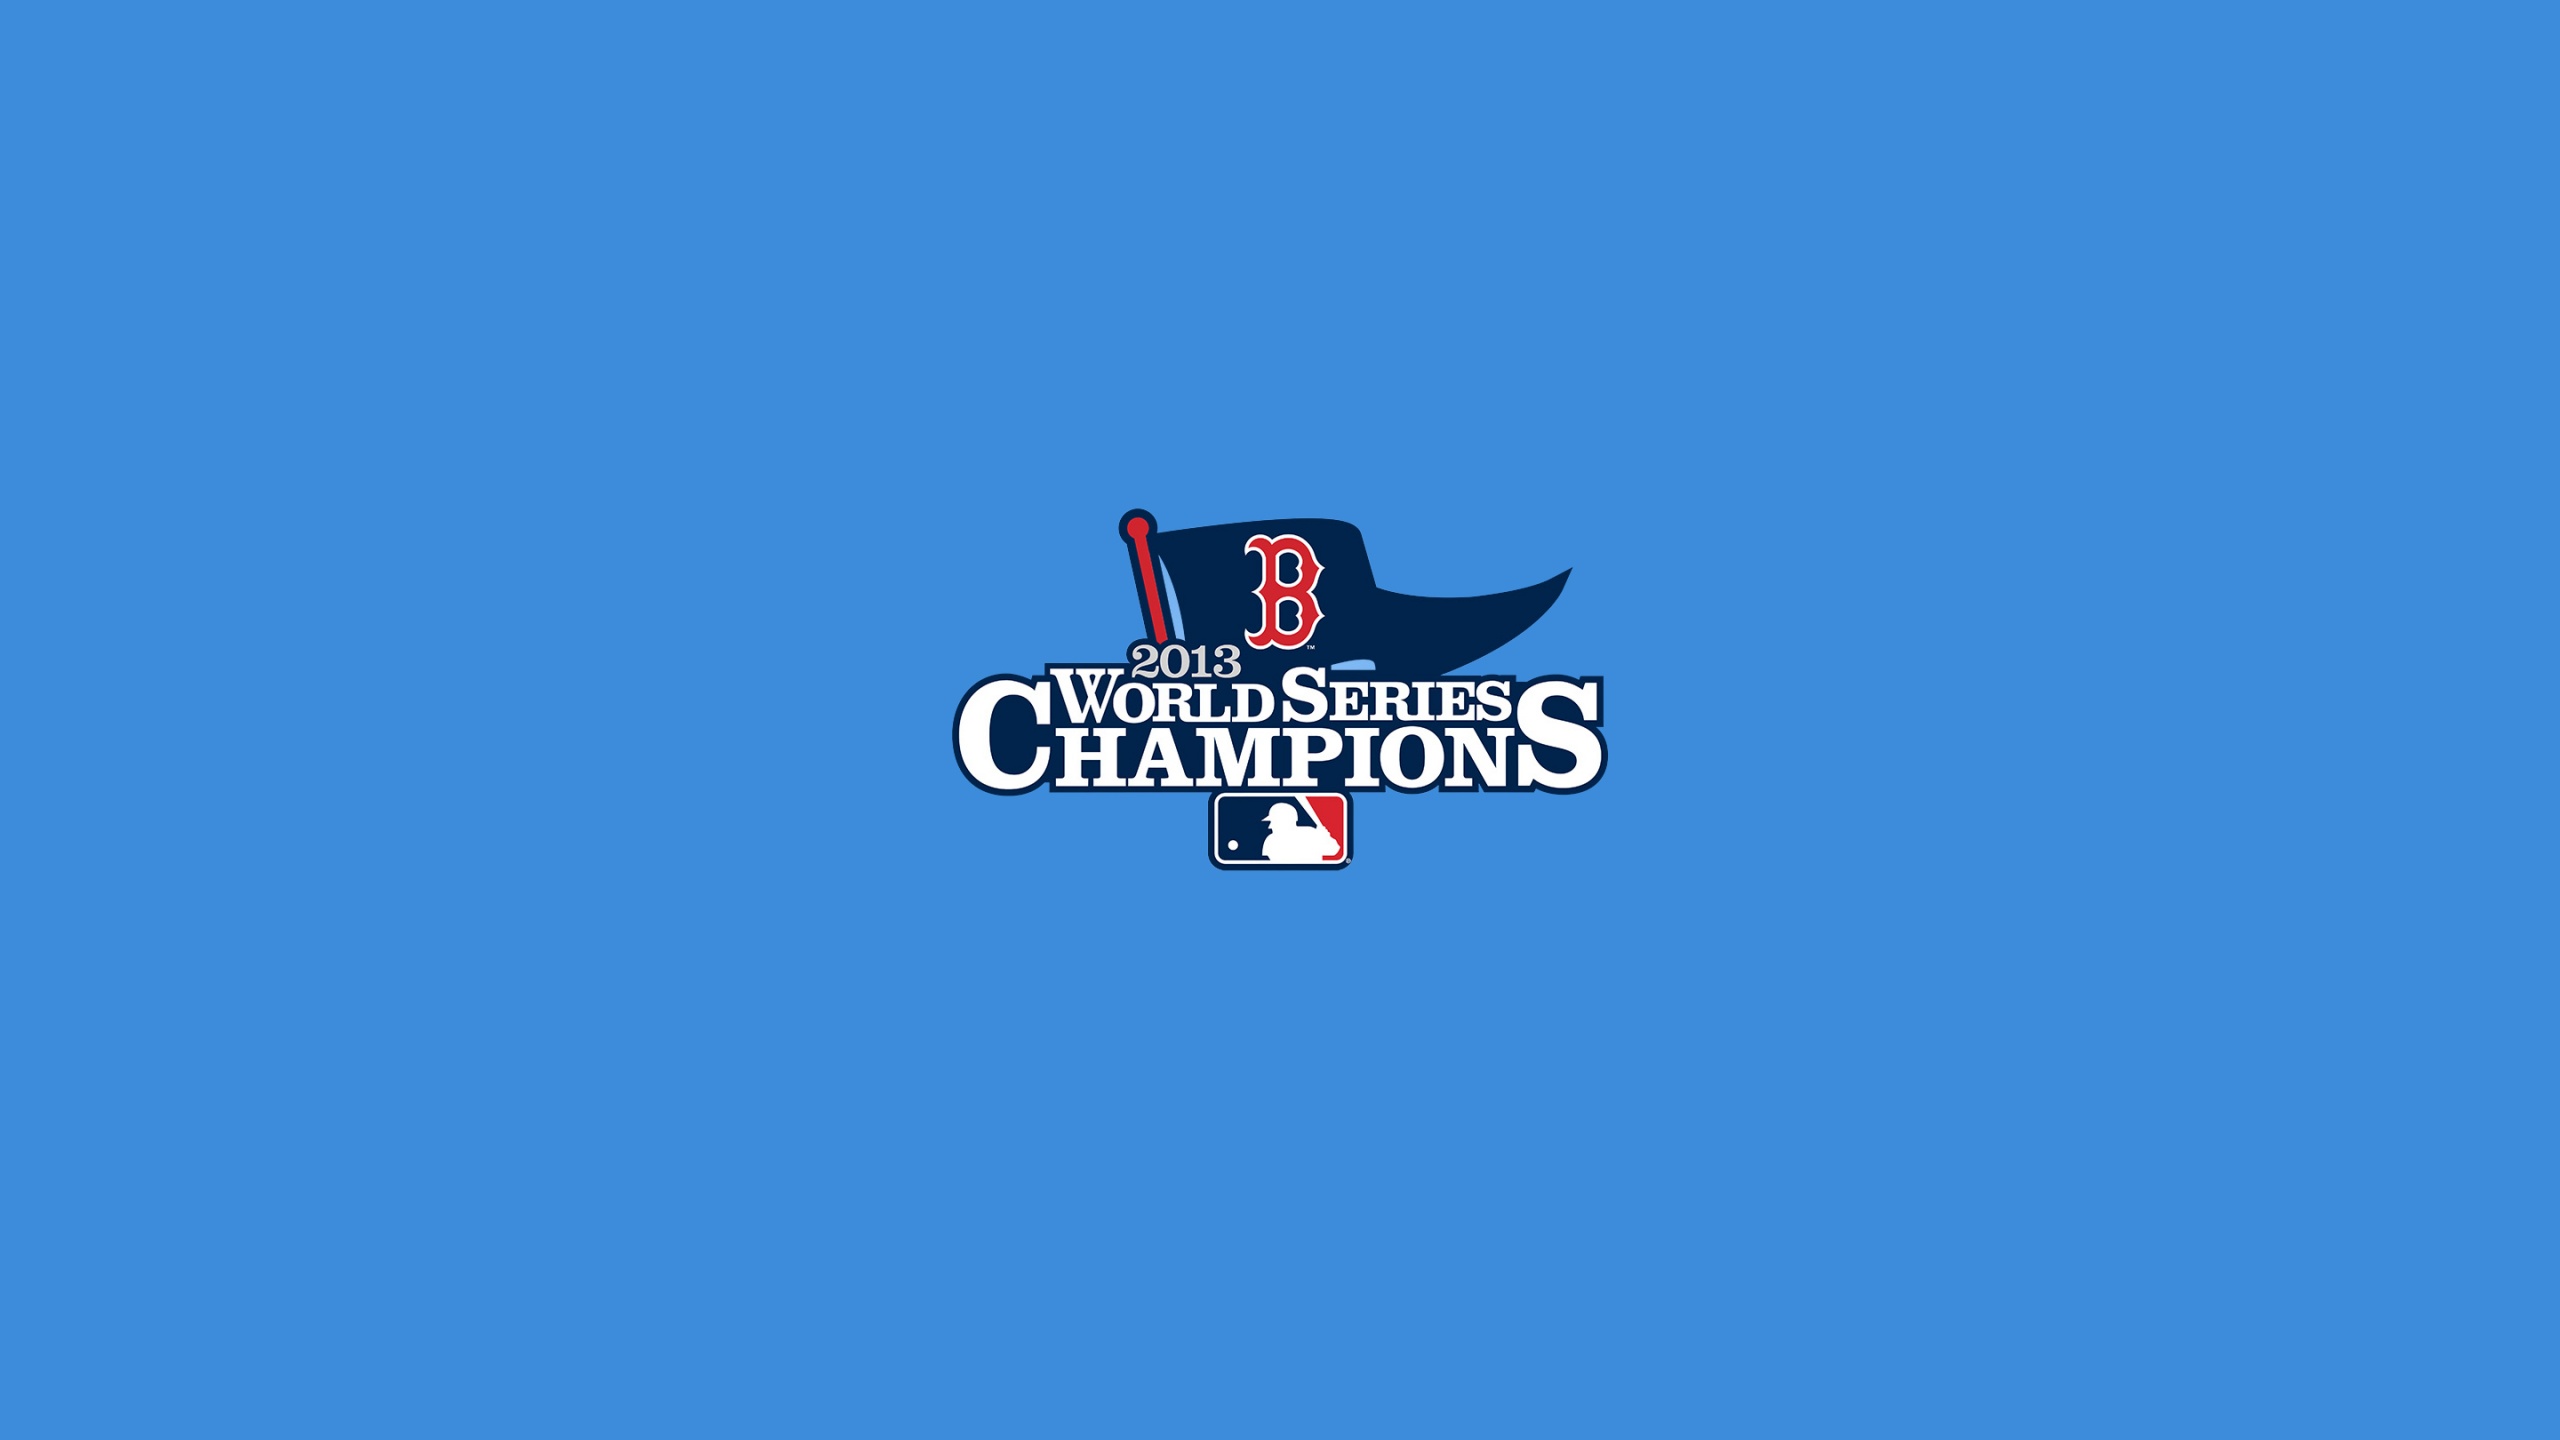 Red Sox World Series Champions 2013